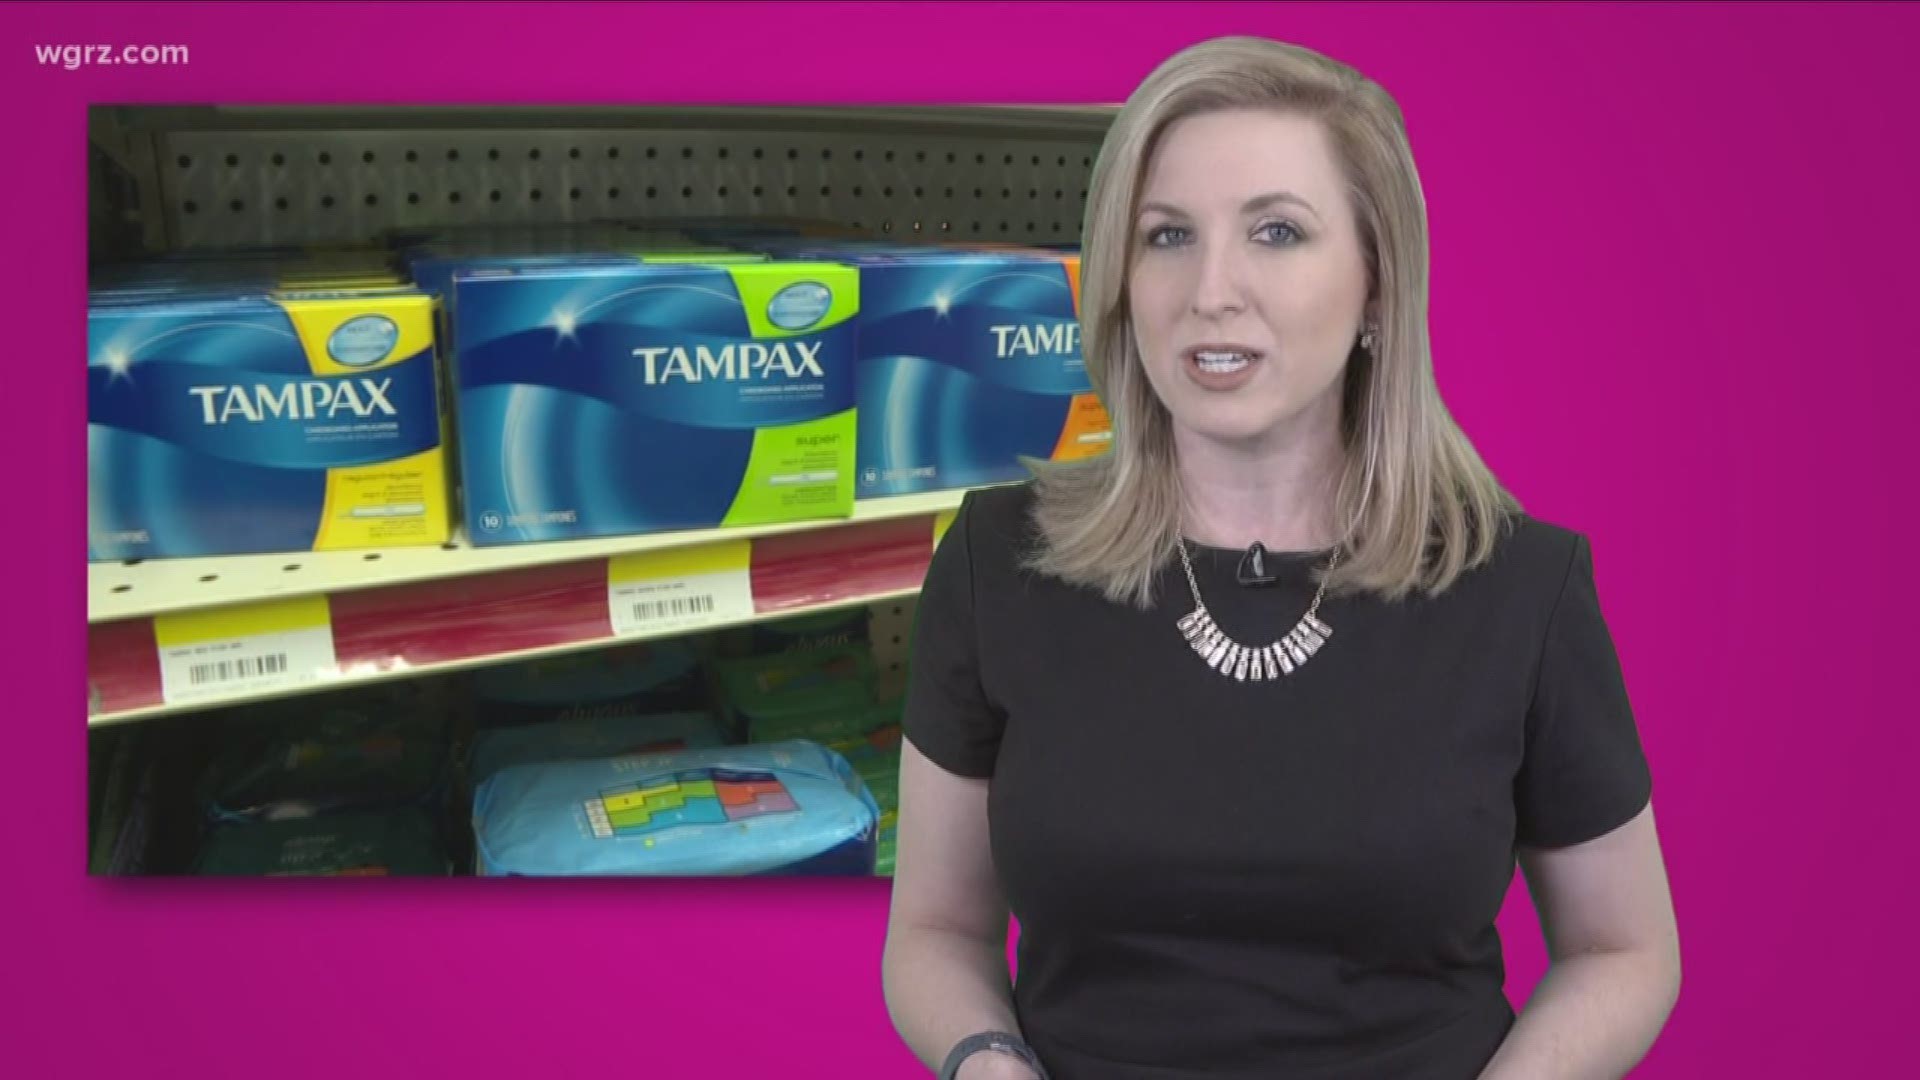 New York state is the first in the country to now require menstrual product packages to include a plain and conspicuous printed list of all the ingredients.